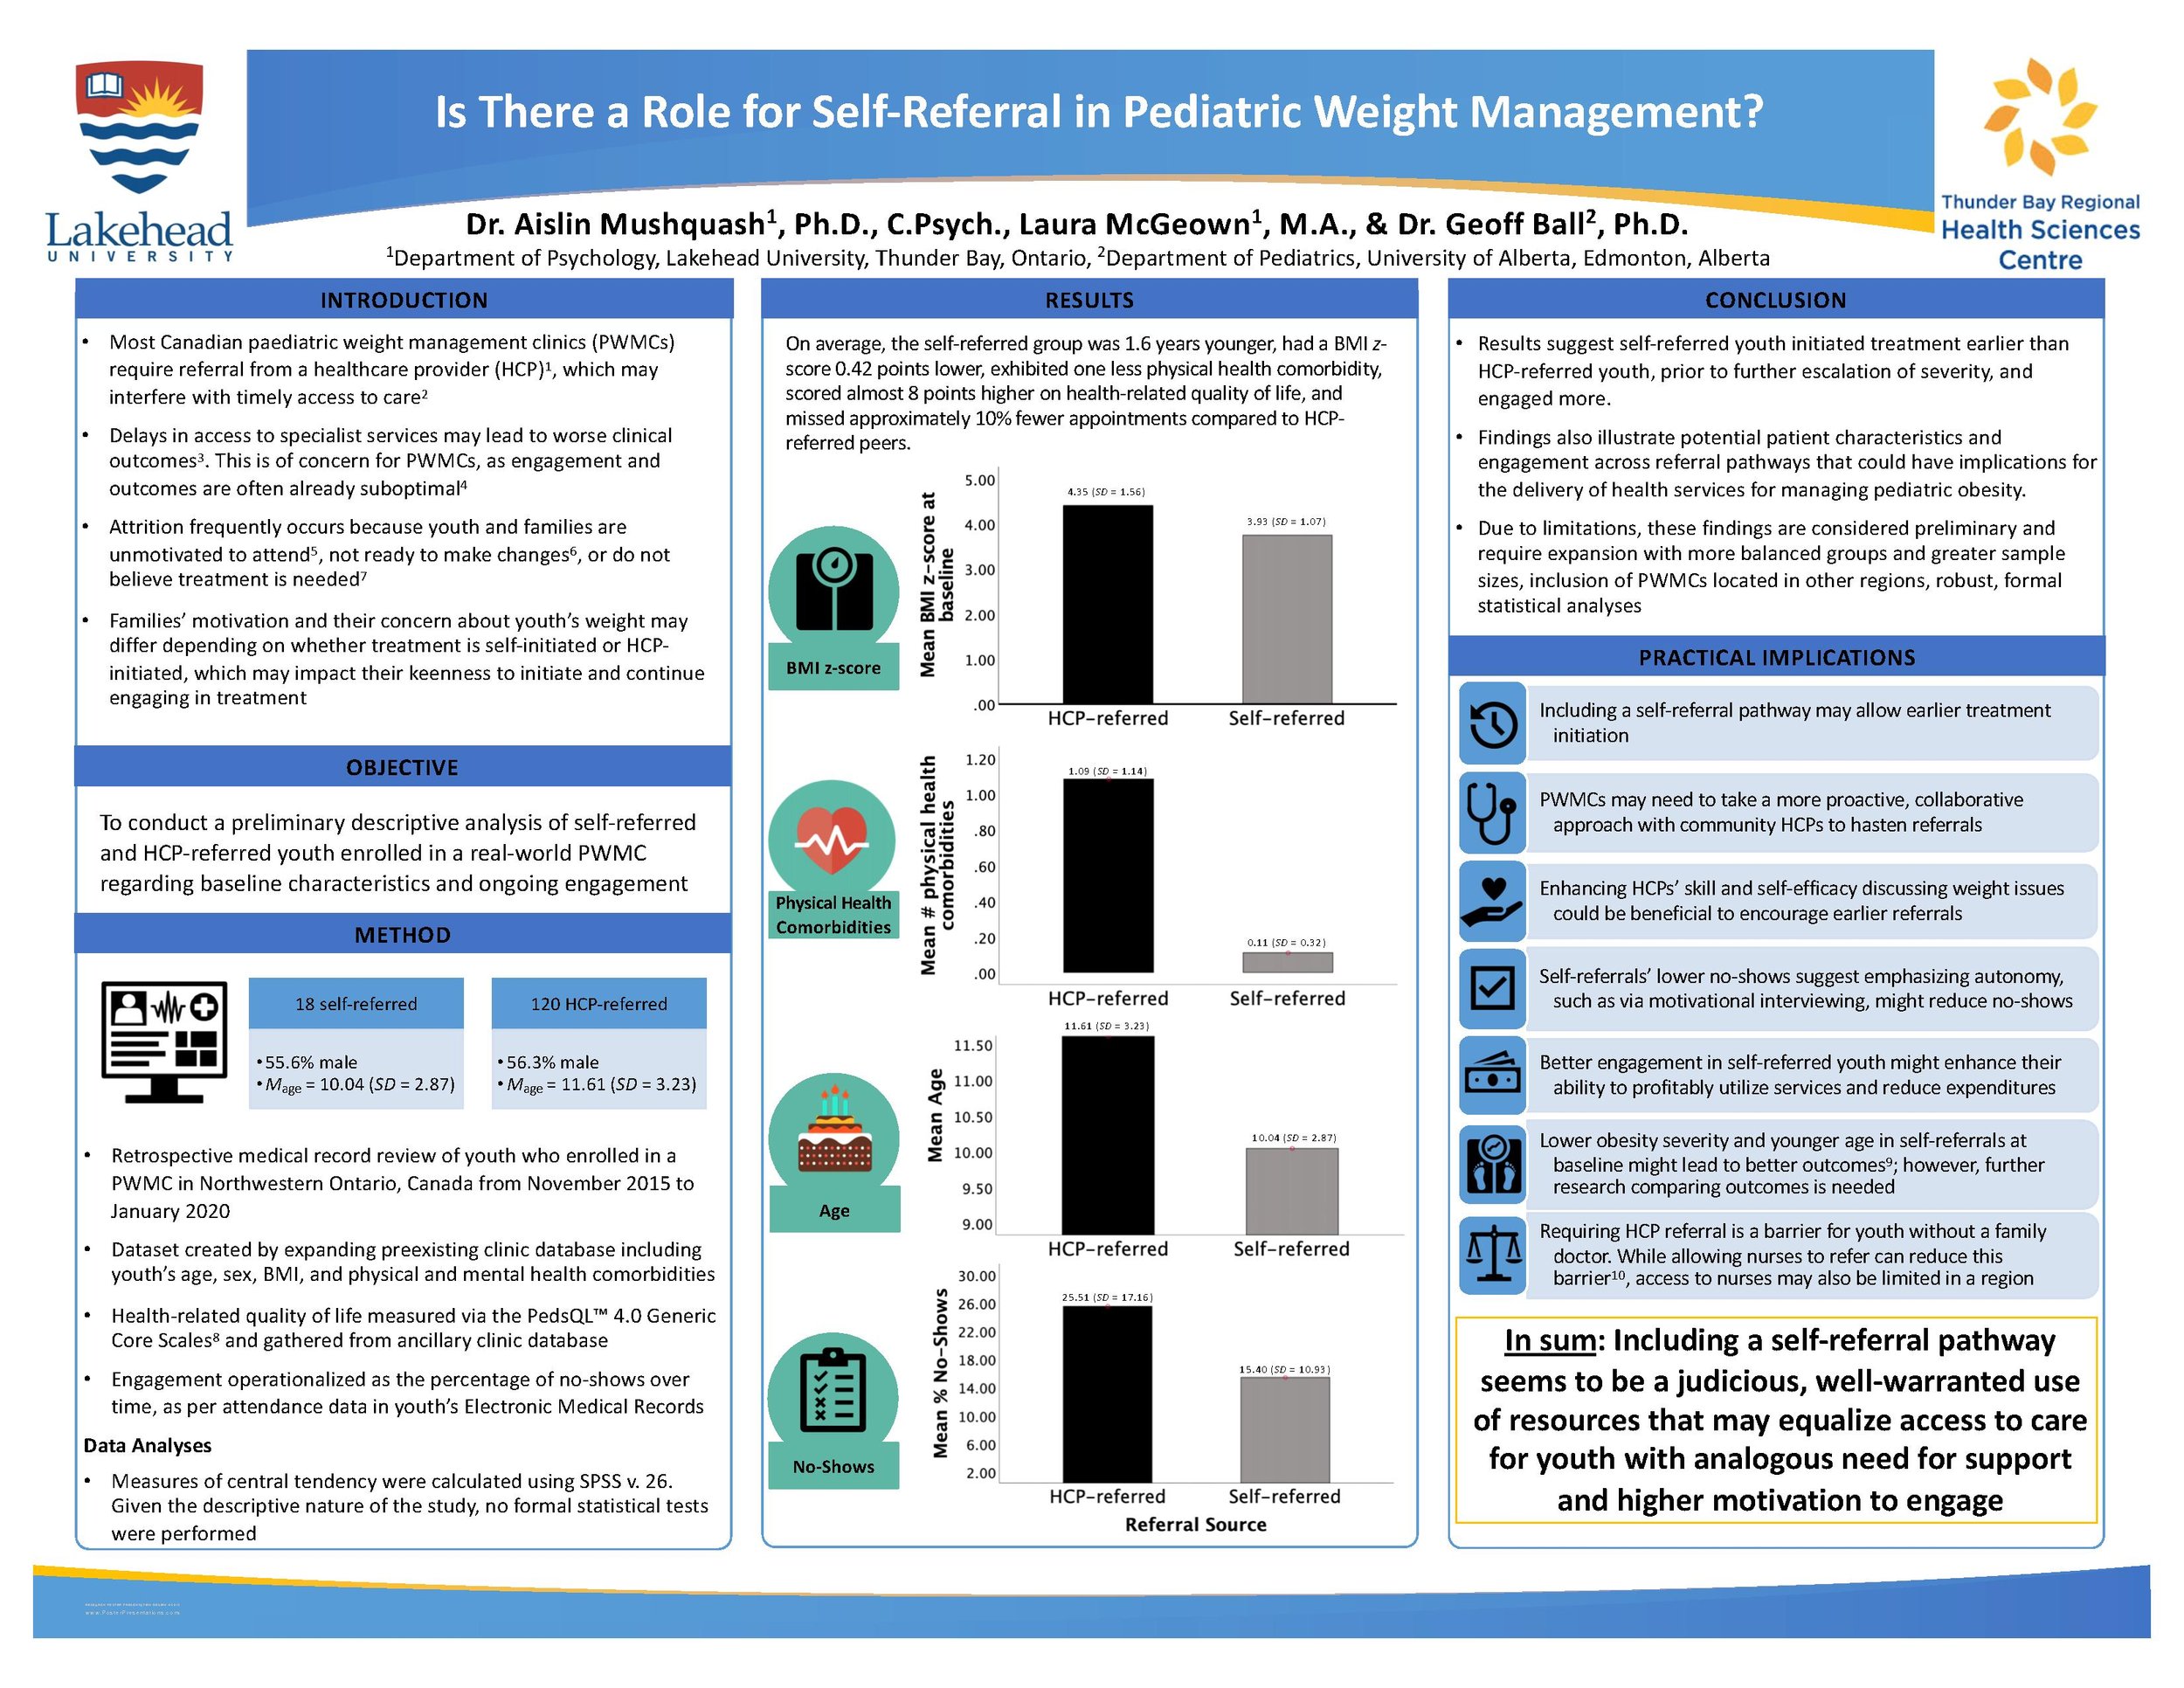 #2 Is there a role for self-referral in pediatric weight management?